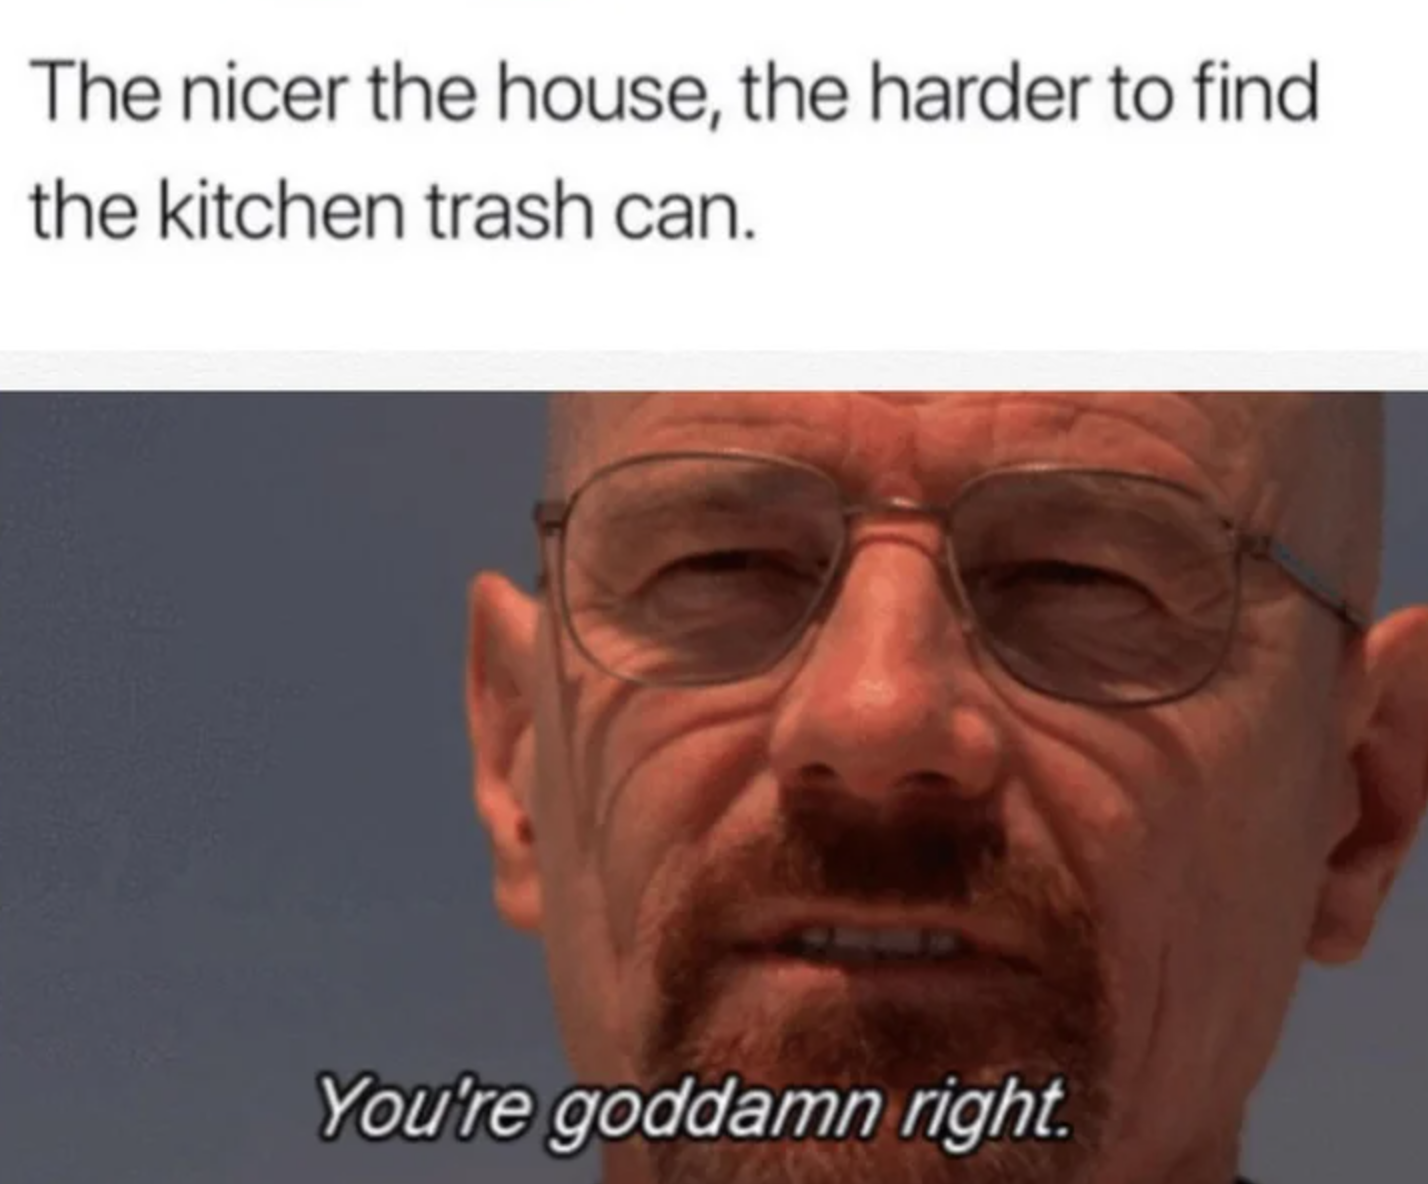 youre goddamn right - The nicer the house, the harder to find the kitchen trash can. You're goddamn right.